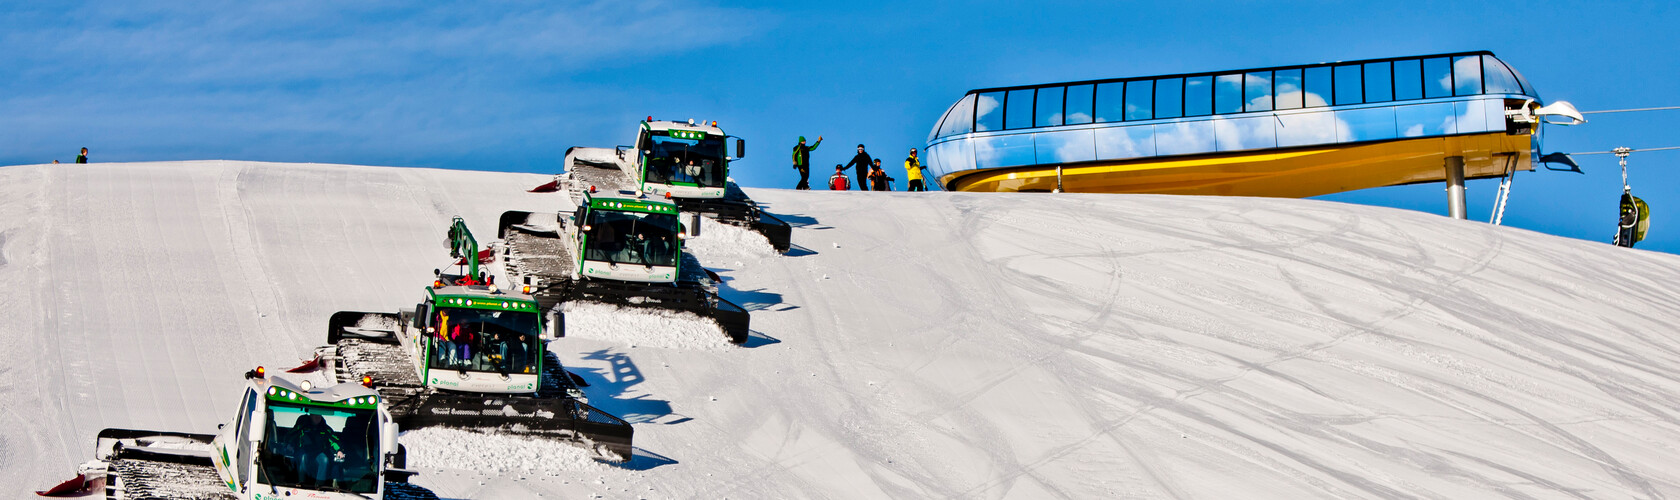 The slopes are prepared daily from 05:00 pm for best quality! | © Tom Lamm